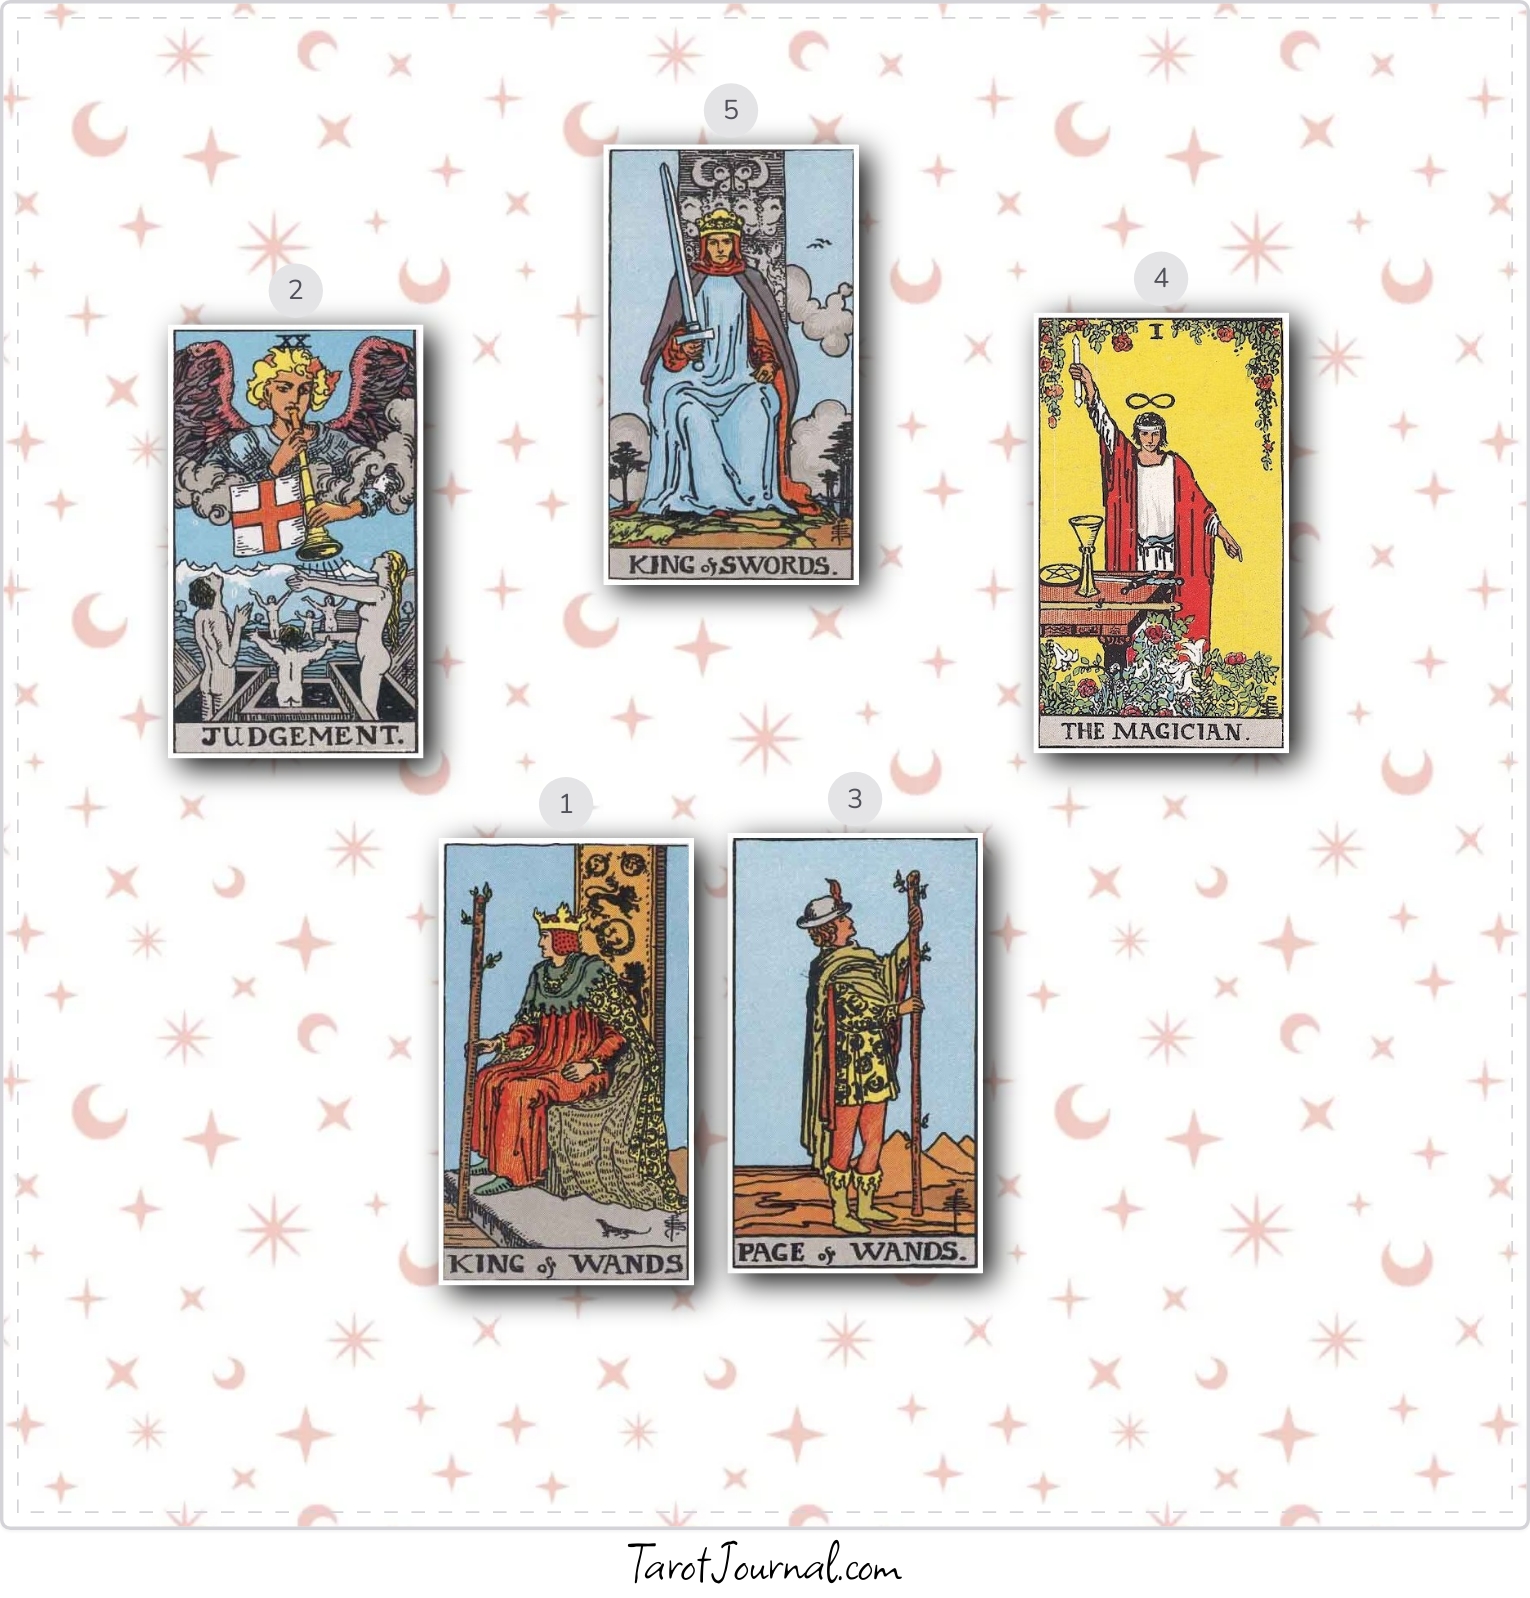 How can be revealed about our connection. - tarot reading by Yohann